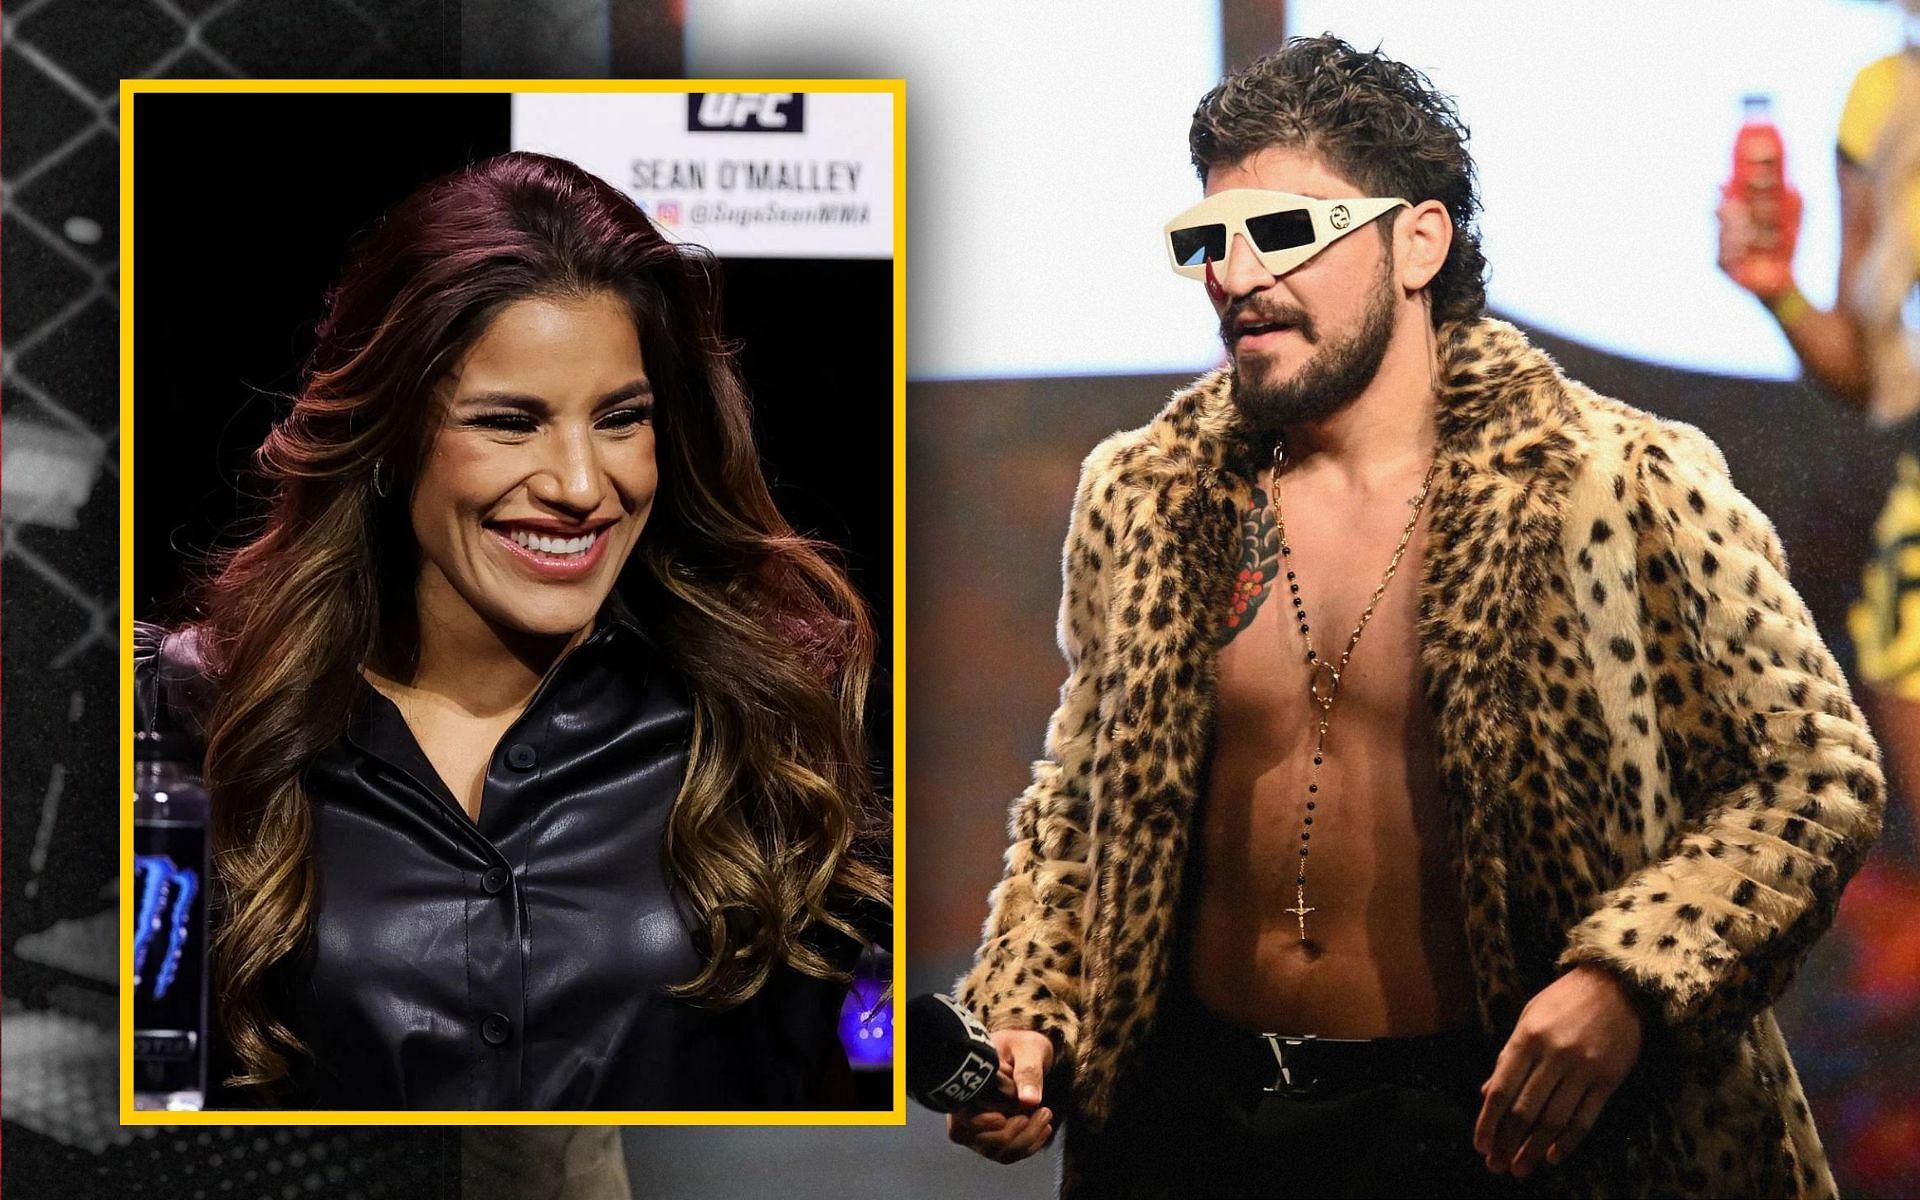 Julianna Pena reveals Dillon Danis sliding into her DMs. [Image courtesy: Getty Images]